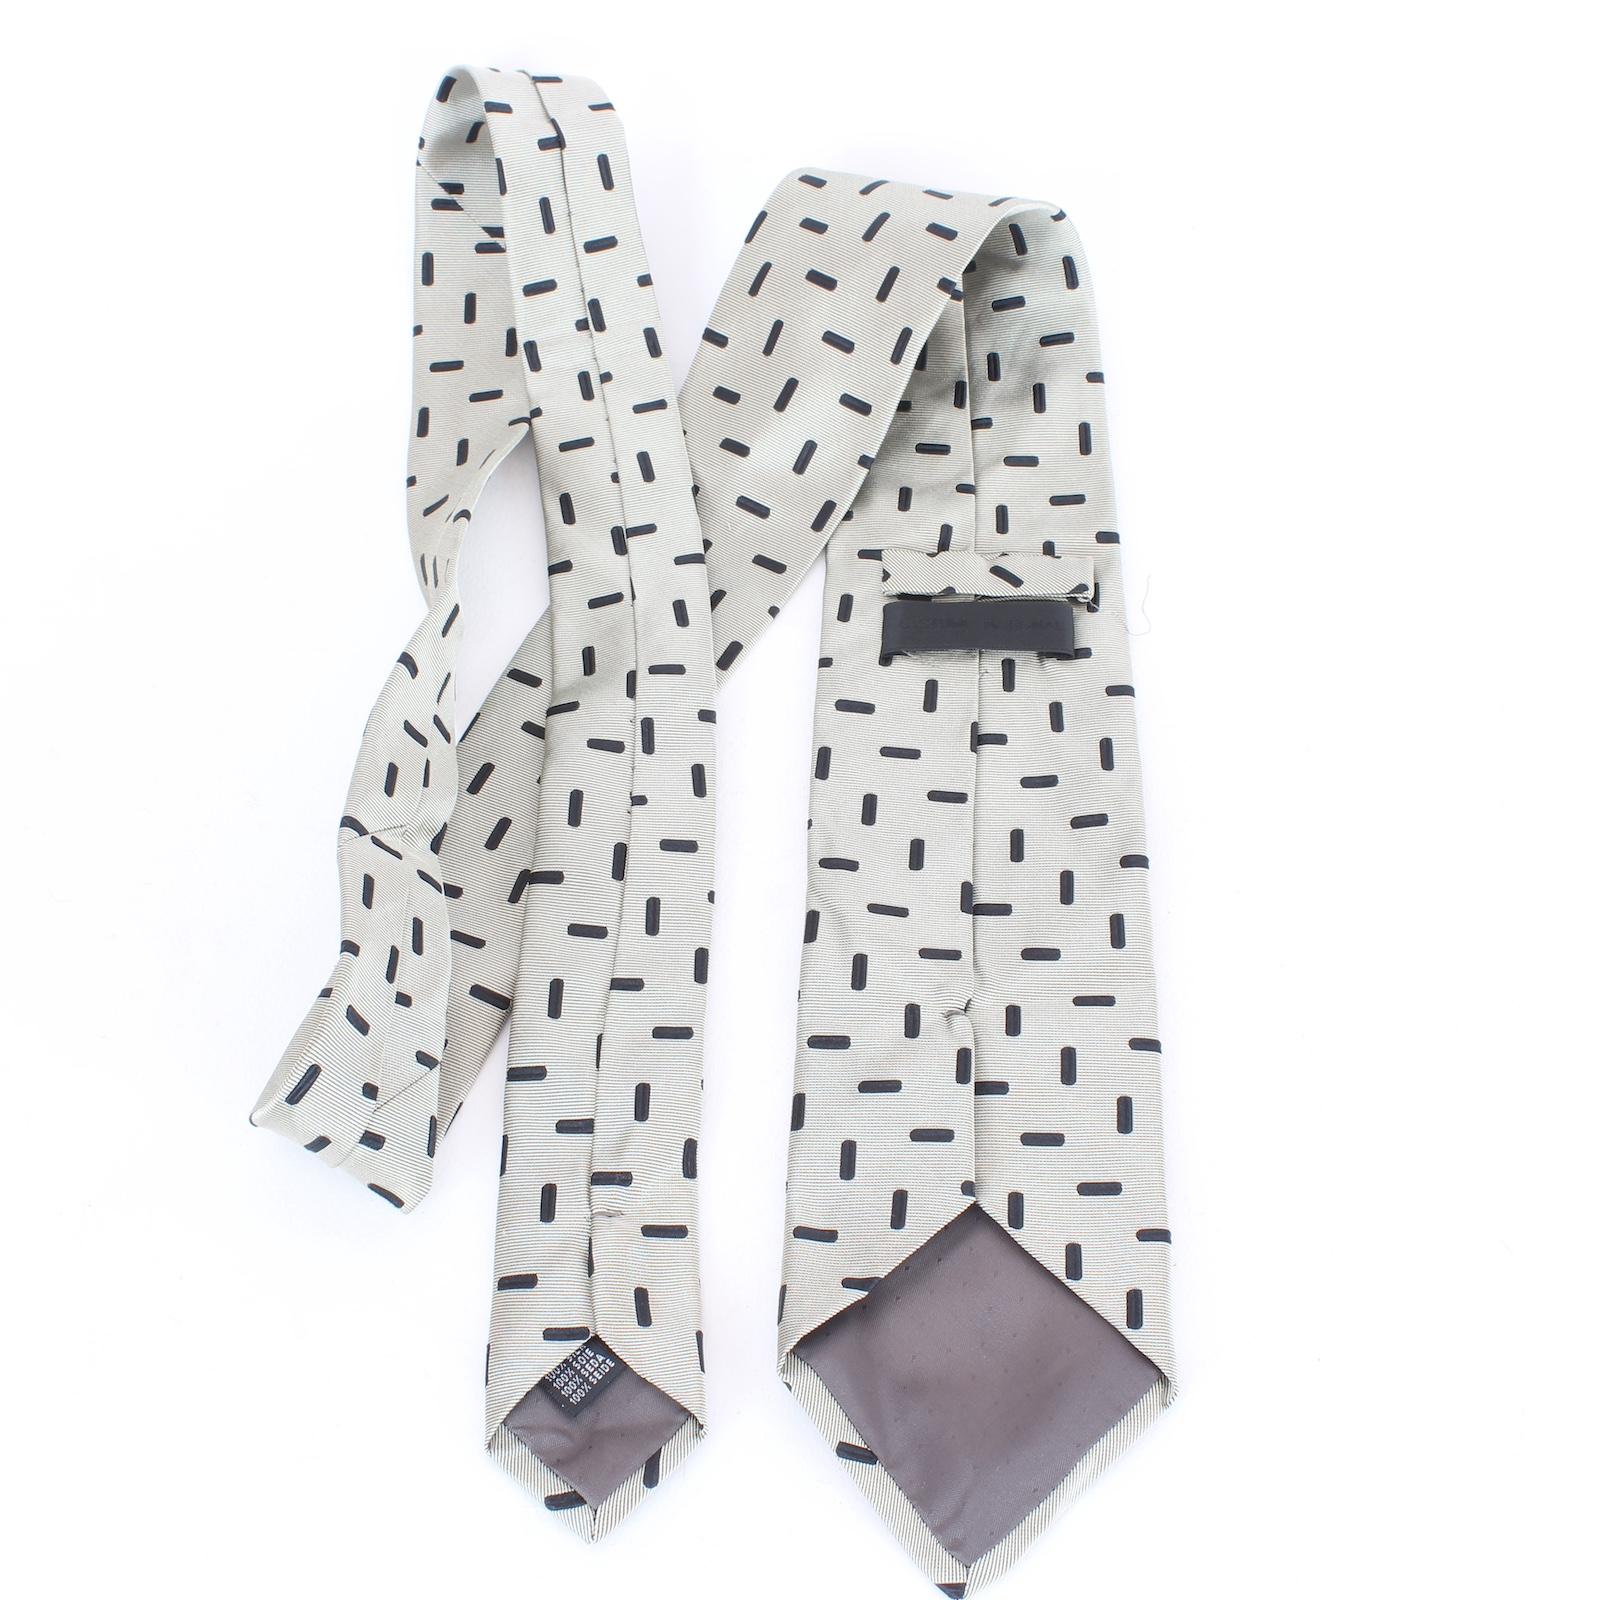 Costume National elegant 2000s tie. Gray color with black geometric designs, 100% silk. Made in italy.

Length: 147 cm
Width: 9 cm